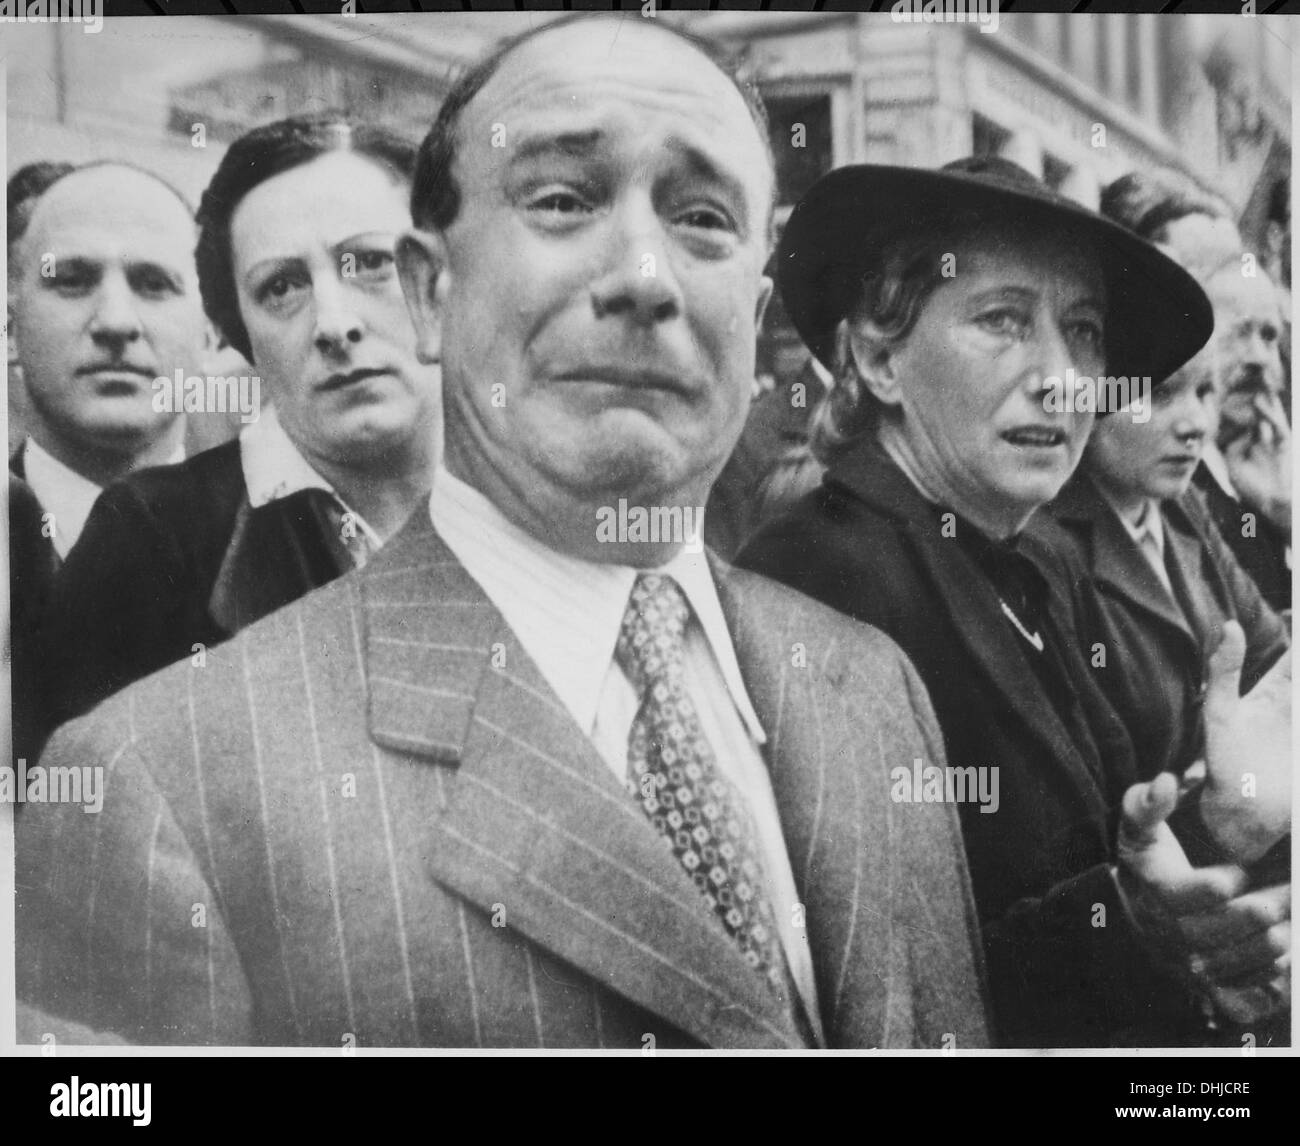 A Frenchman weeps as German soldiers march into the French capital, Paris, on June 14, 1940, after the Allied armies ha 892 Stock Photo